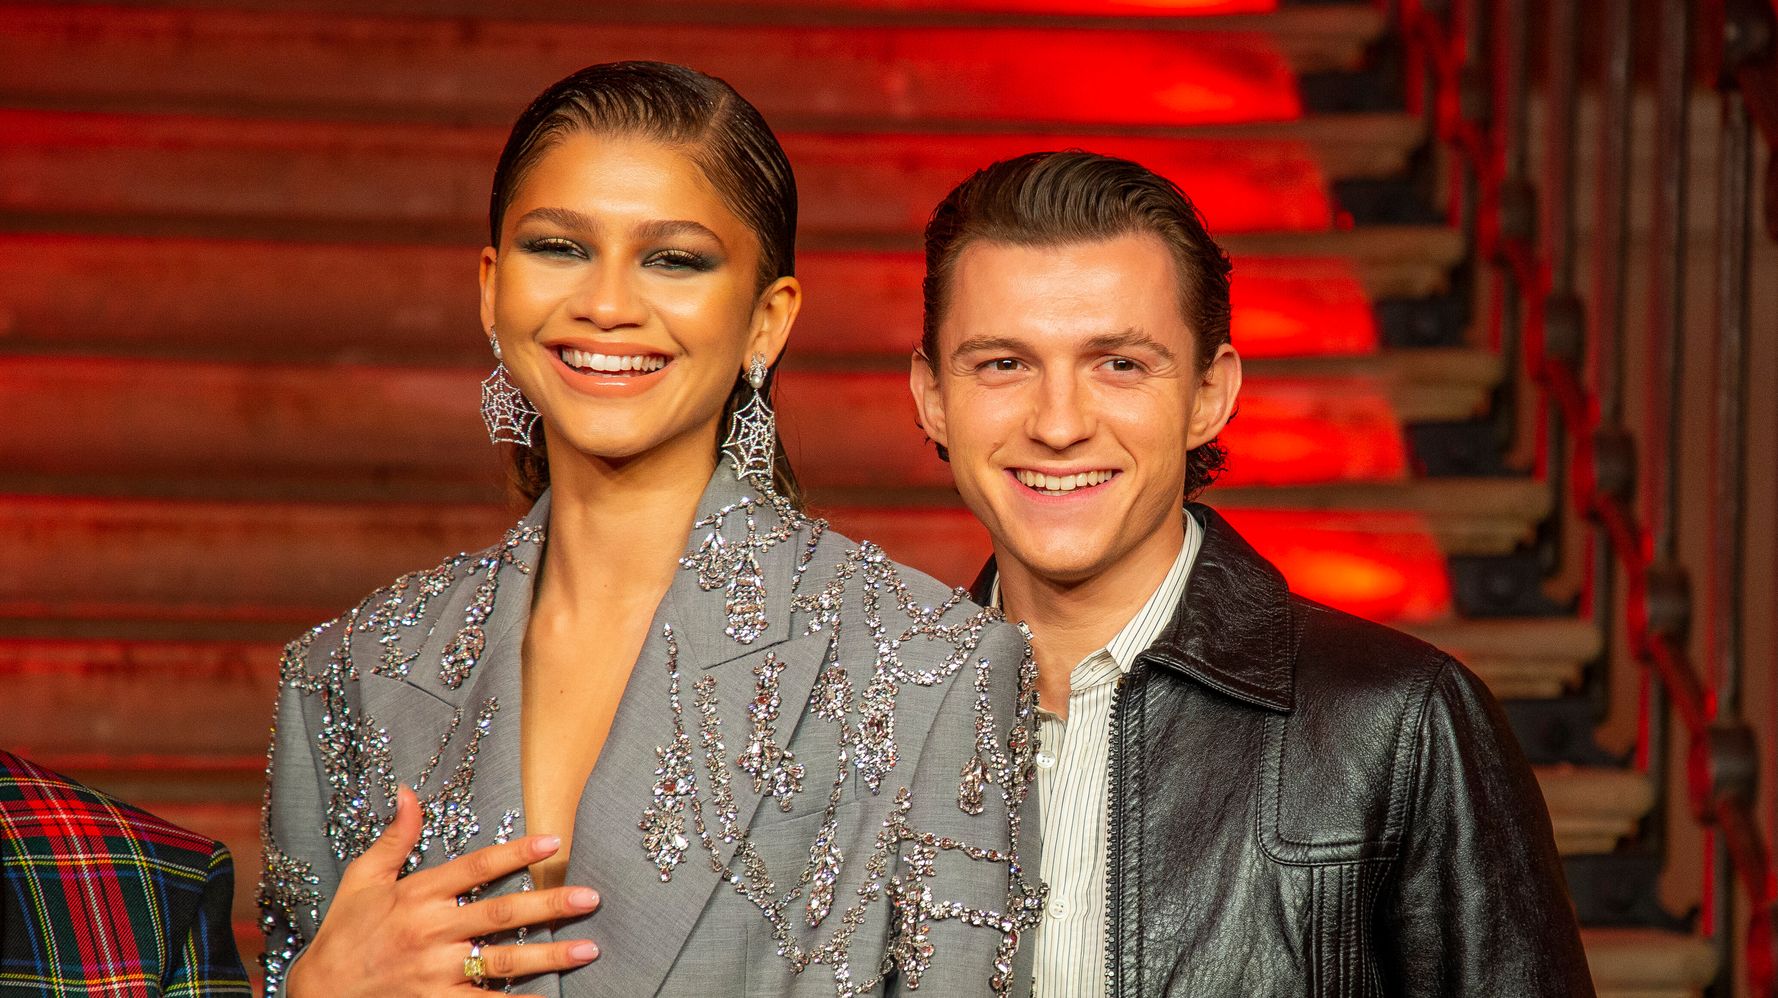 Tom Holland's comment on Zendaya's Instagram has fans obsessed